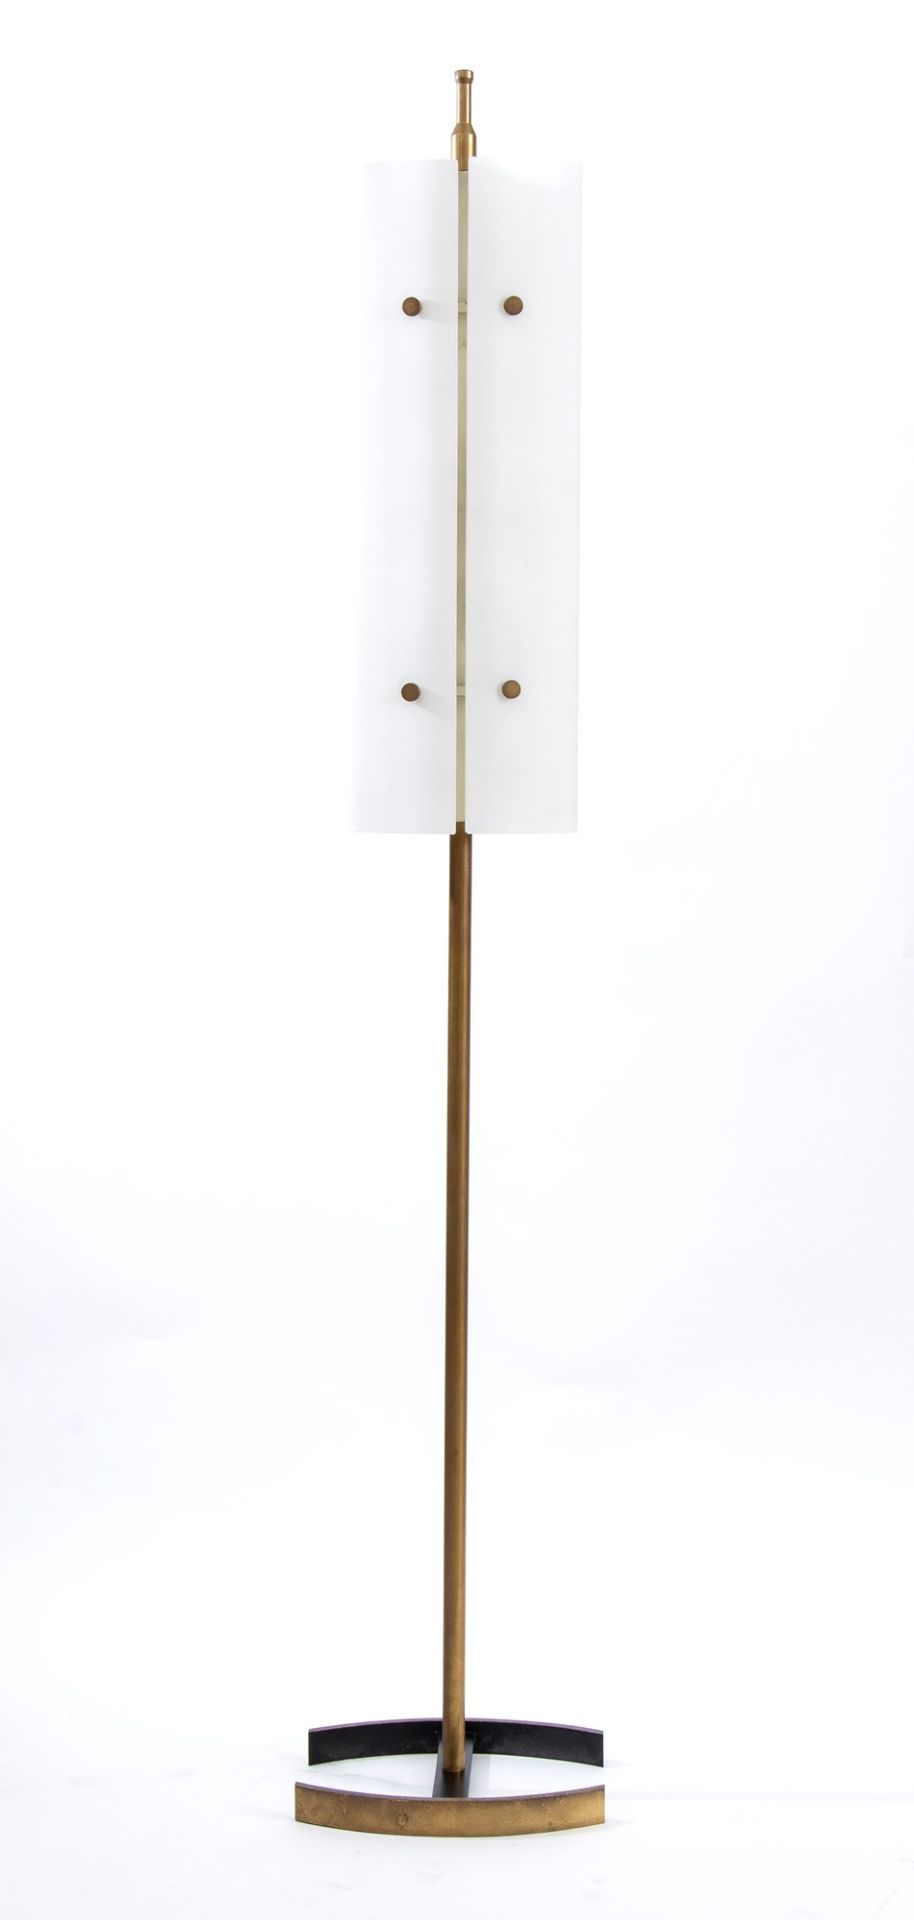 Angelo Lelli Ancona 1915-Monza 1979 Floor lamp mod. 12707 in brass and opal glass diffusers